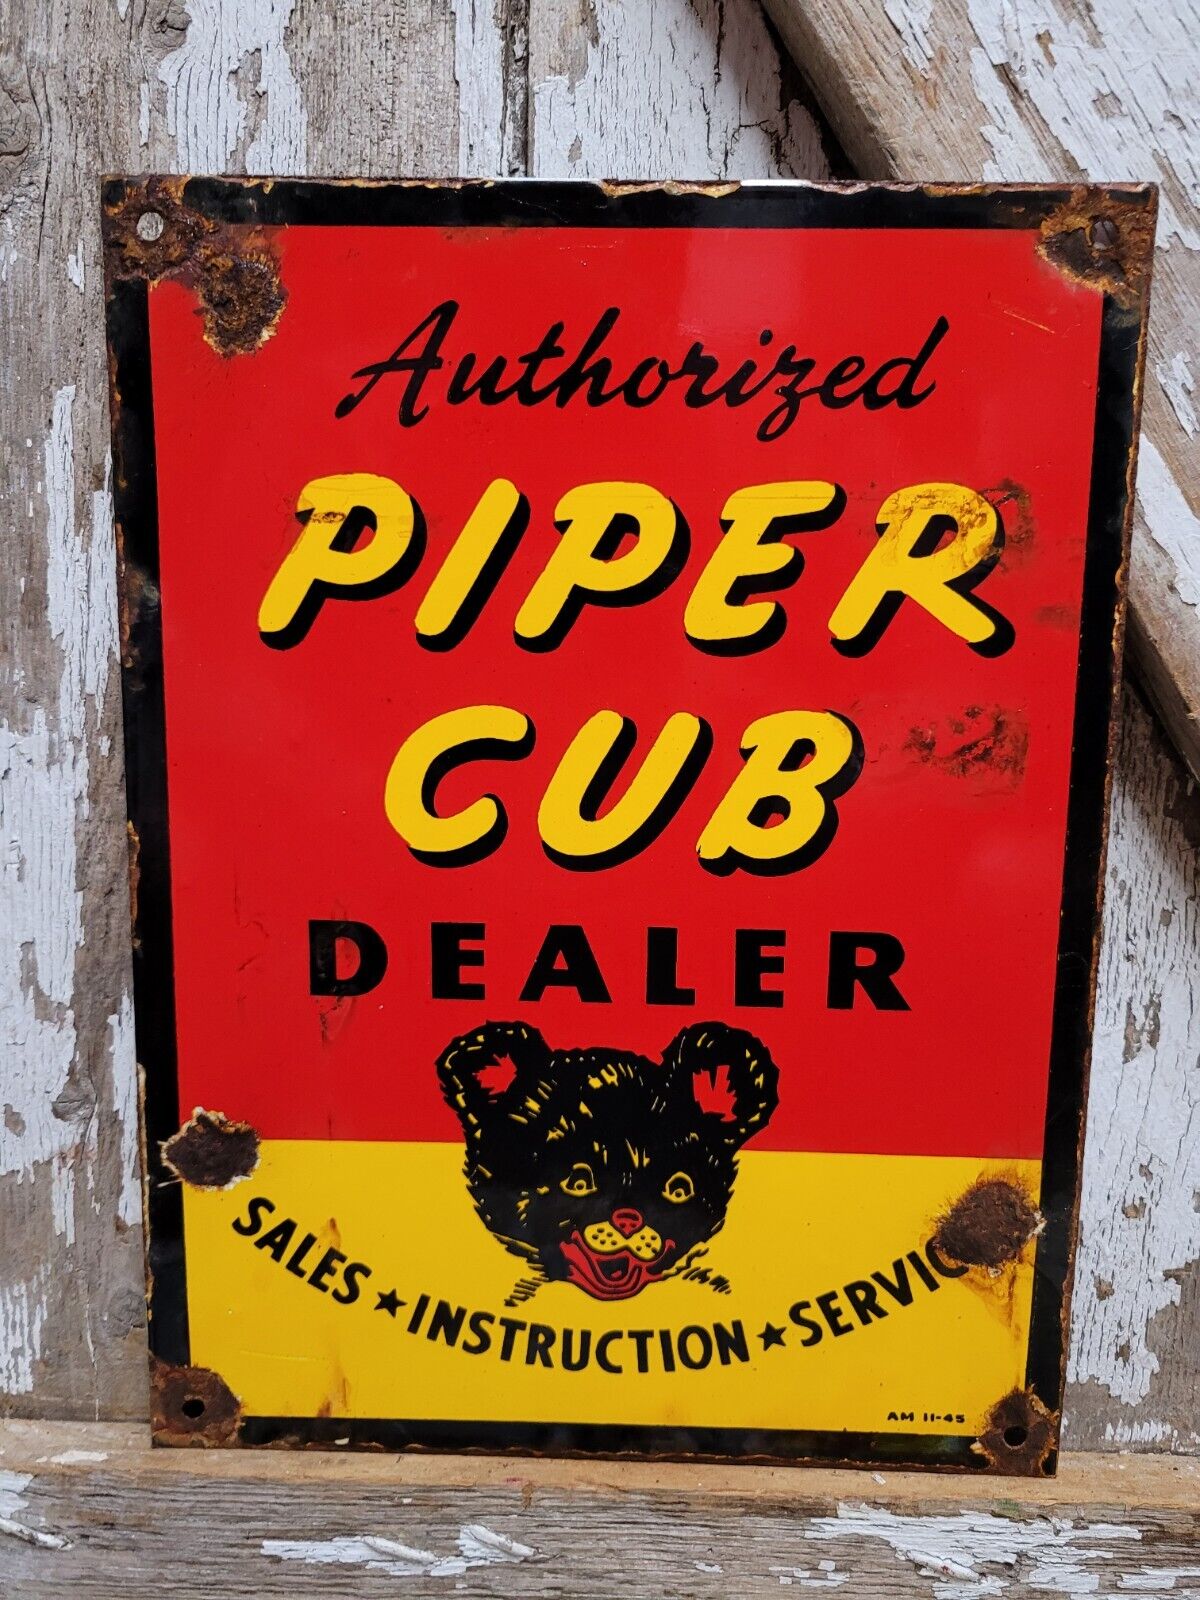 VINTAGE PIPER CUB PORCELAIN SIGN 1945 AVIATION AIRPLANE FLYING SERVICE SALES